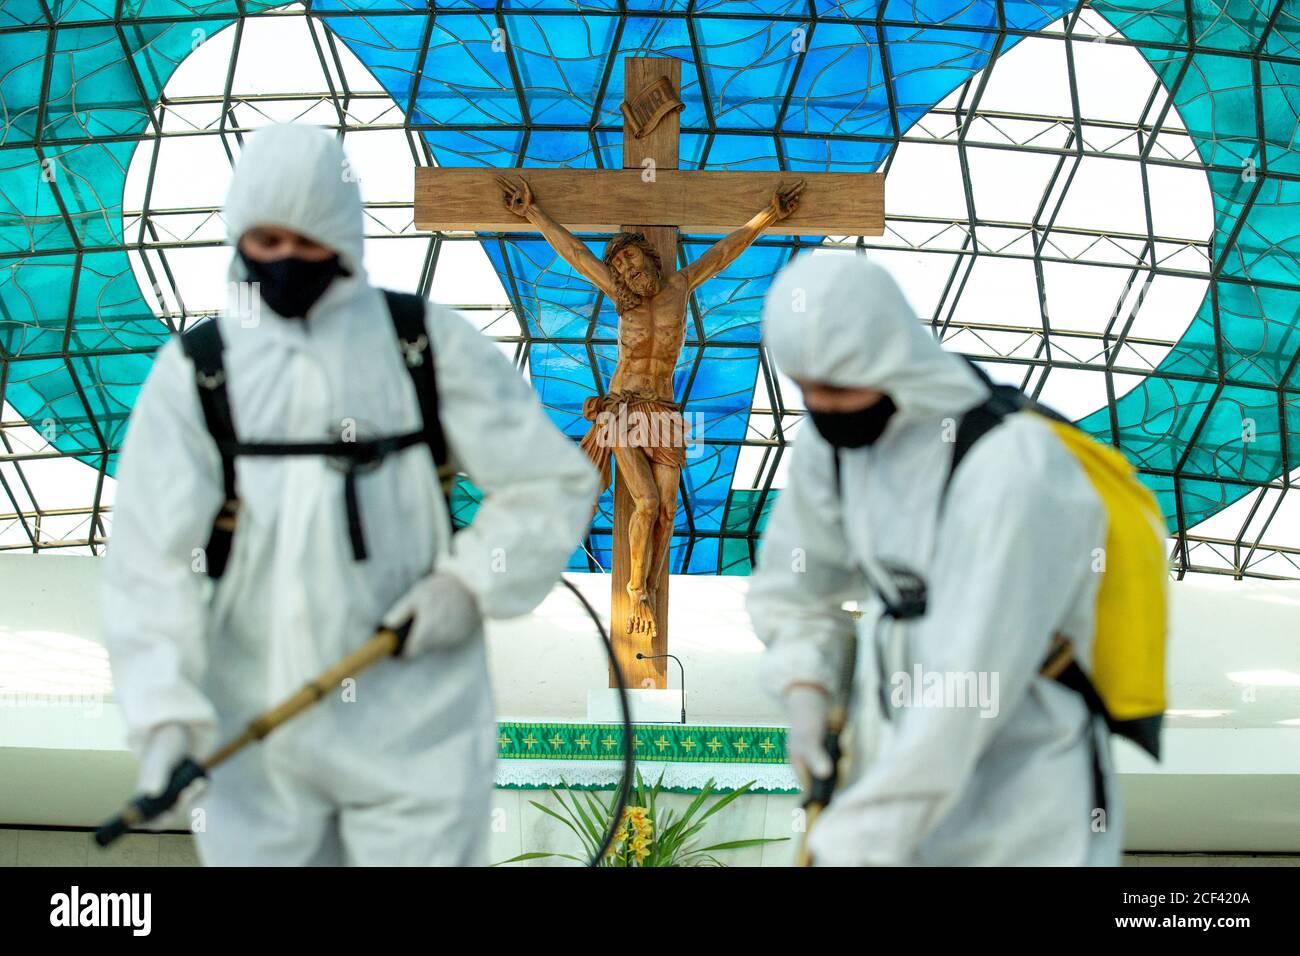 03 September 2020, Brazil, Brasília: Members of the army in protective suits disinfect the cathedral Nossa Senhora Aparecida. According to official information, Brazil may cross the border of 4 million Covid-19 infected people. According to the government, the mortality rate is 3.1 percent. Photo: Myke Sena/dpa Stock Photo